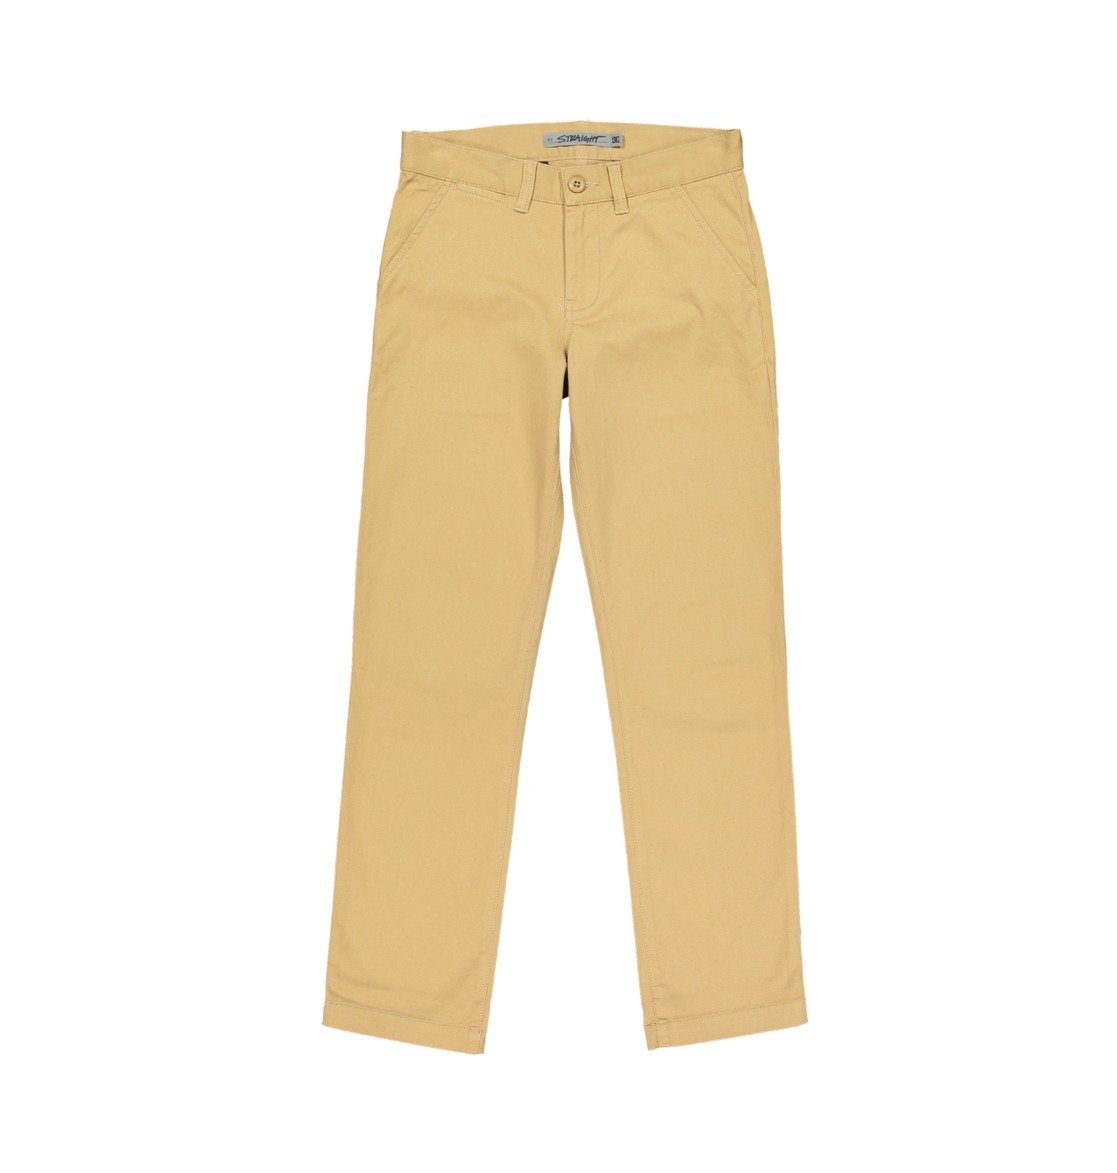 DC - WORKER STRAIGHT CHINO PANT BOY - INCENCE